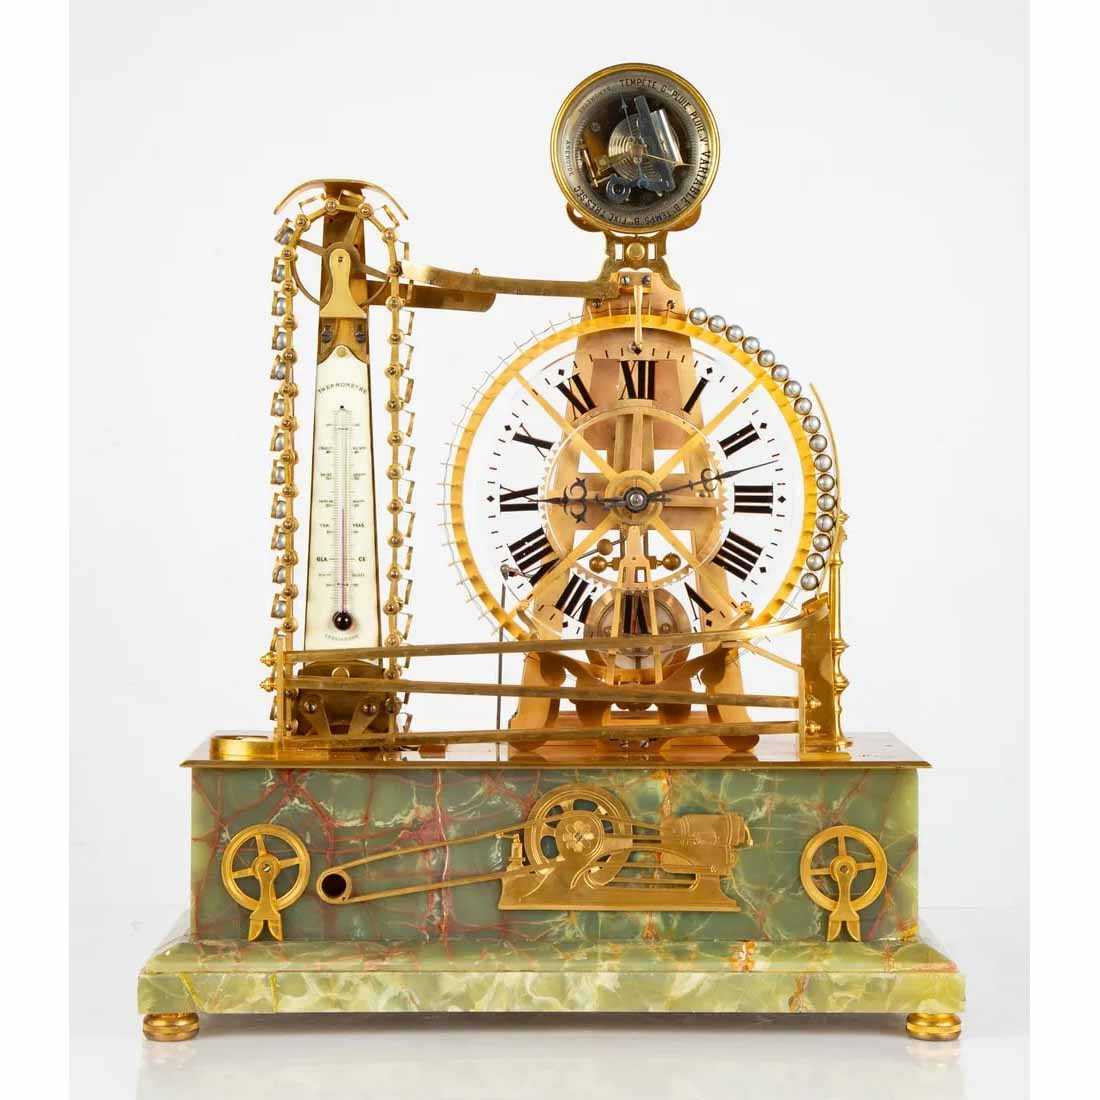 Bronze Gravity Ball Waterwheel Industrial Clock, estimated at $15,000-$25,000 at Cottone.